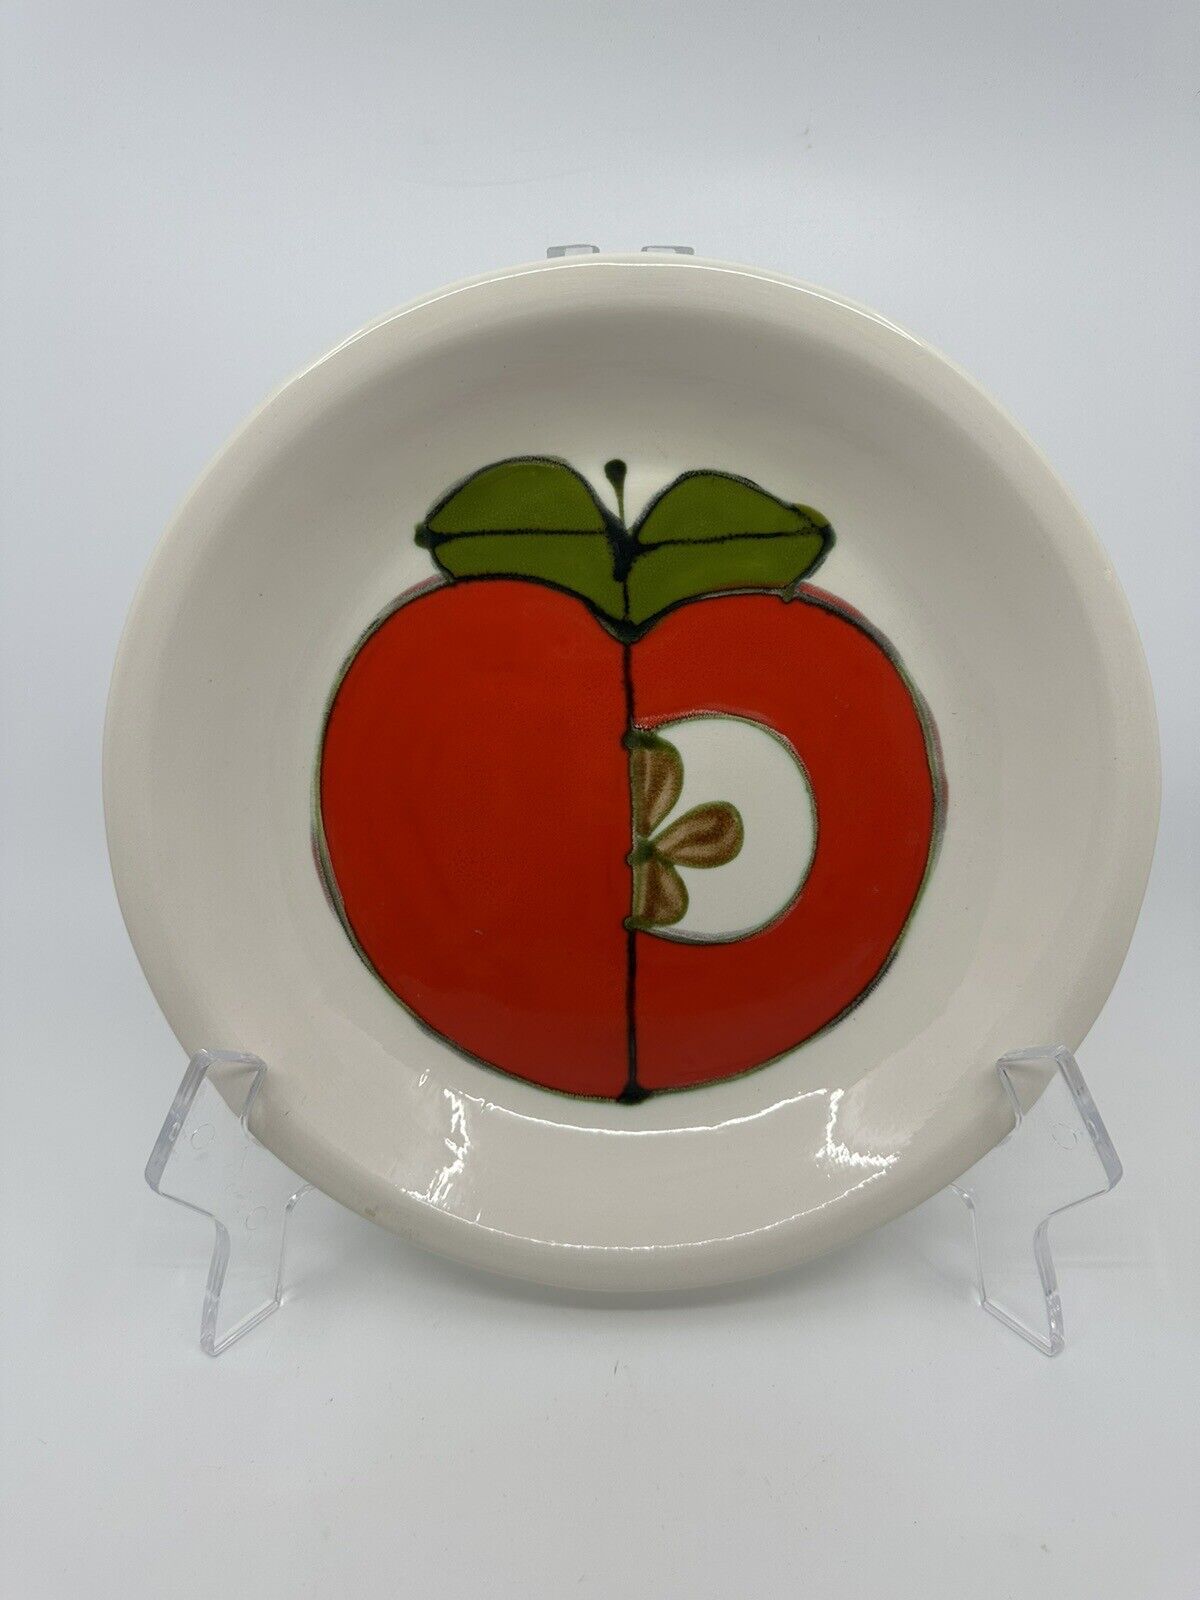 MCM Apple Pie Plate Handmade by Kate For Ardencraft 10\